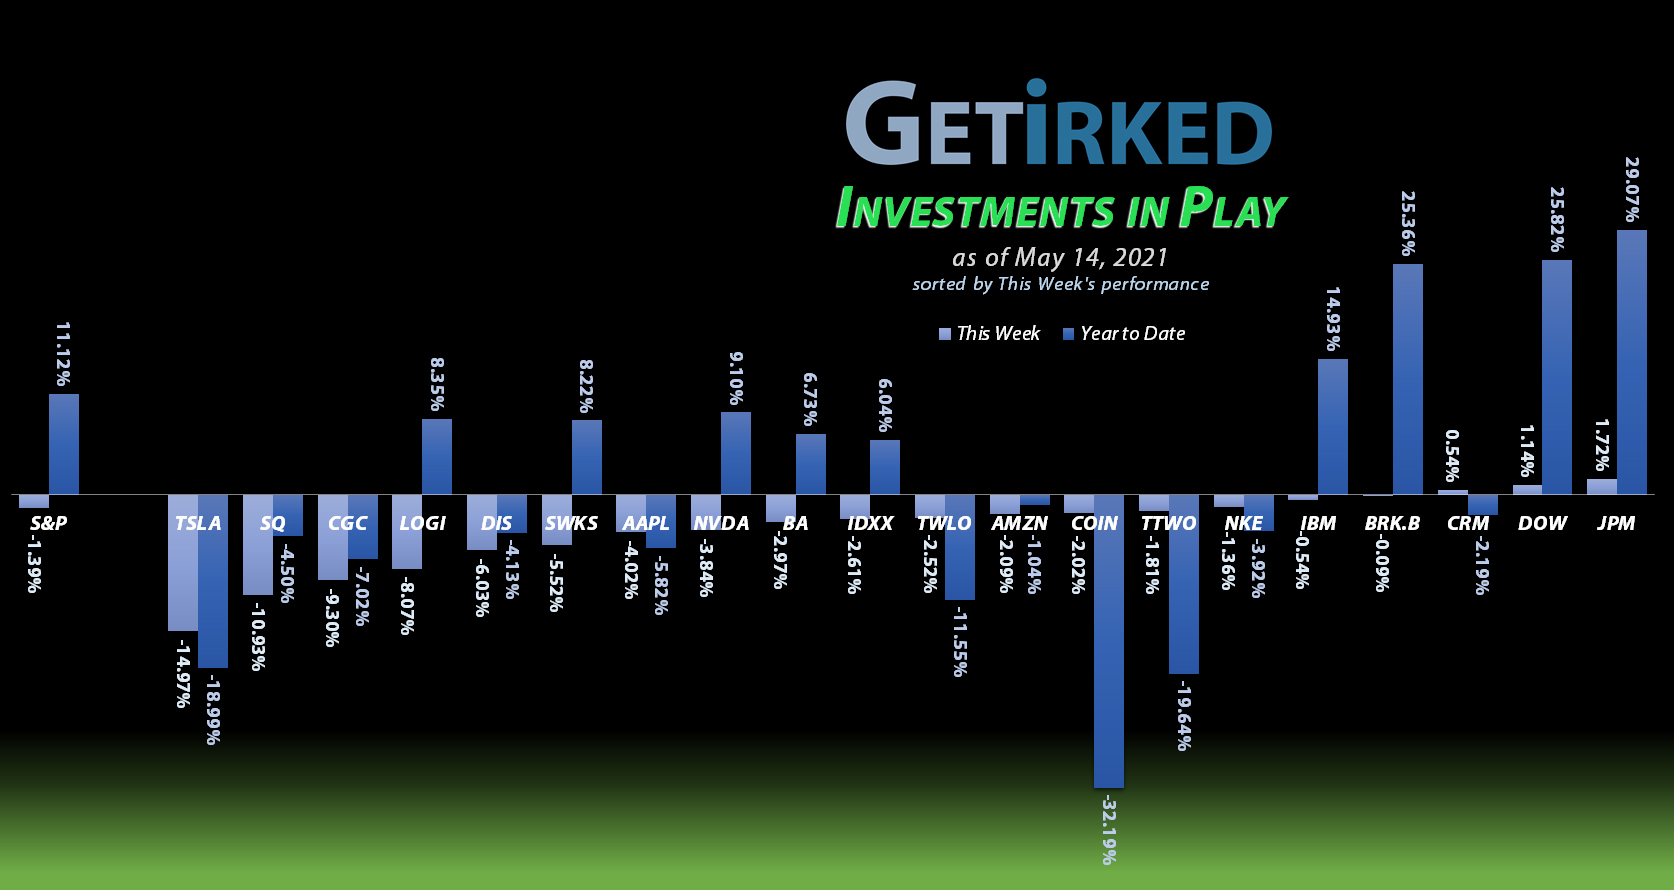 Get Irked - Investments in Play - May 14, 2021